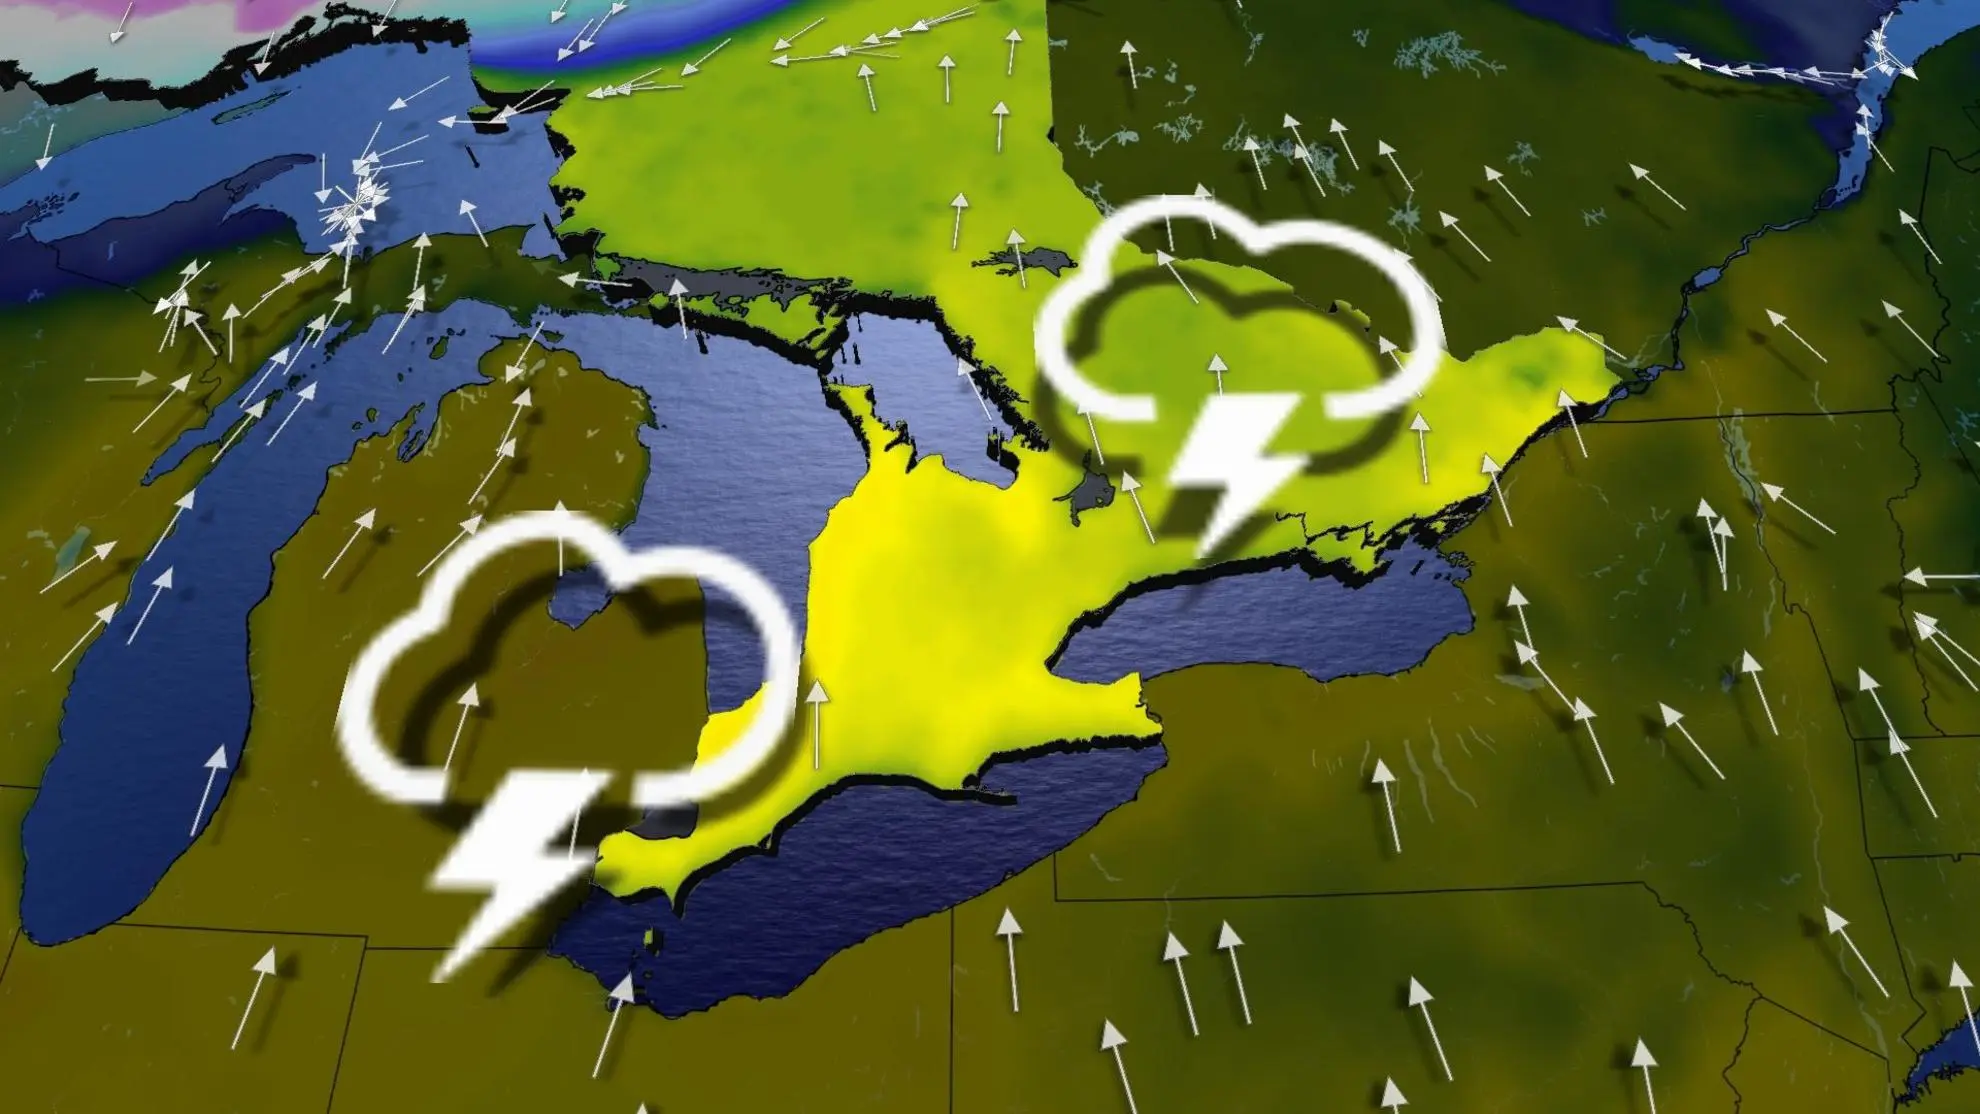 Wild weather swing in Ontario with thunder threat followed by flash-freeze risk